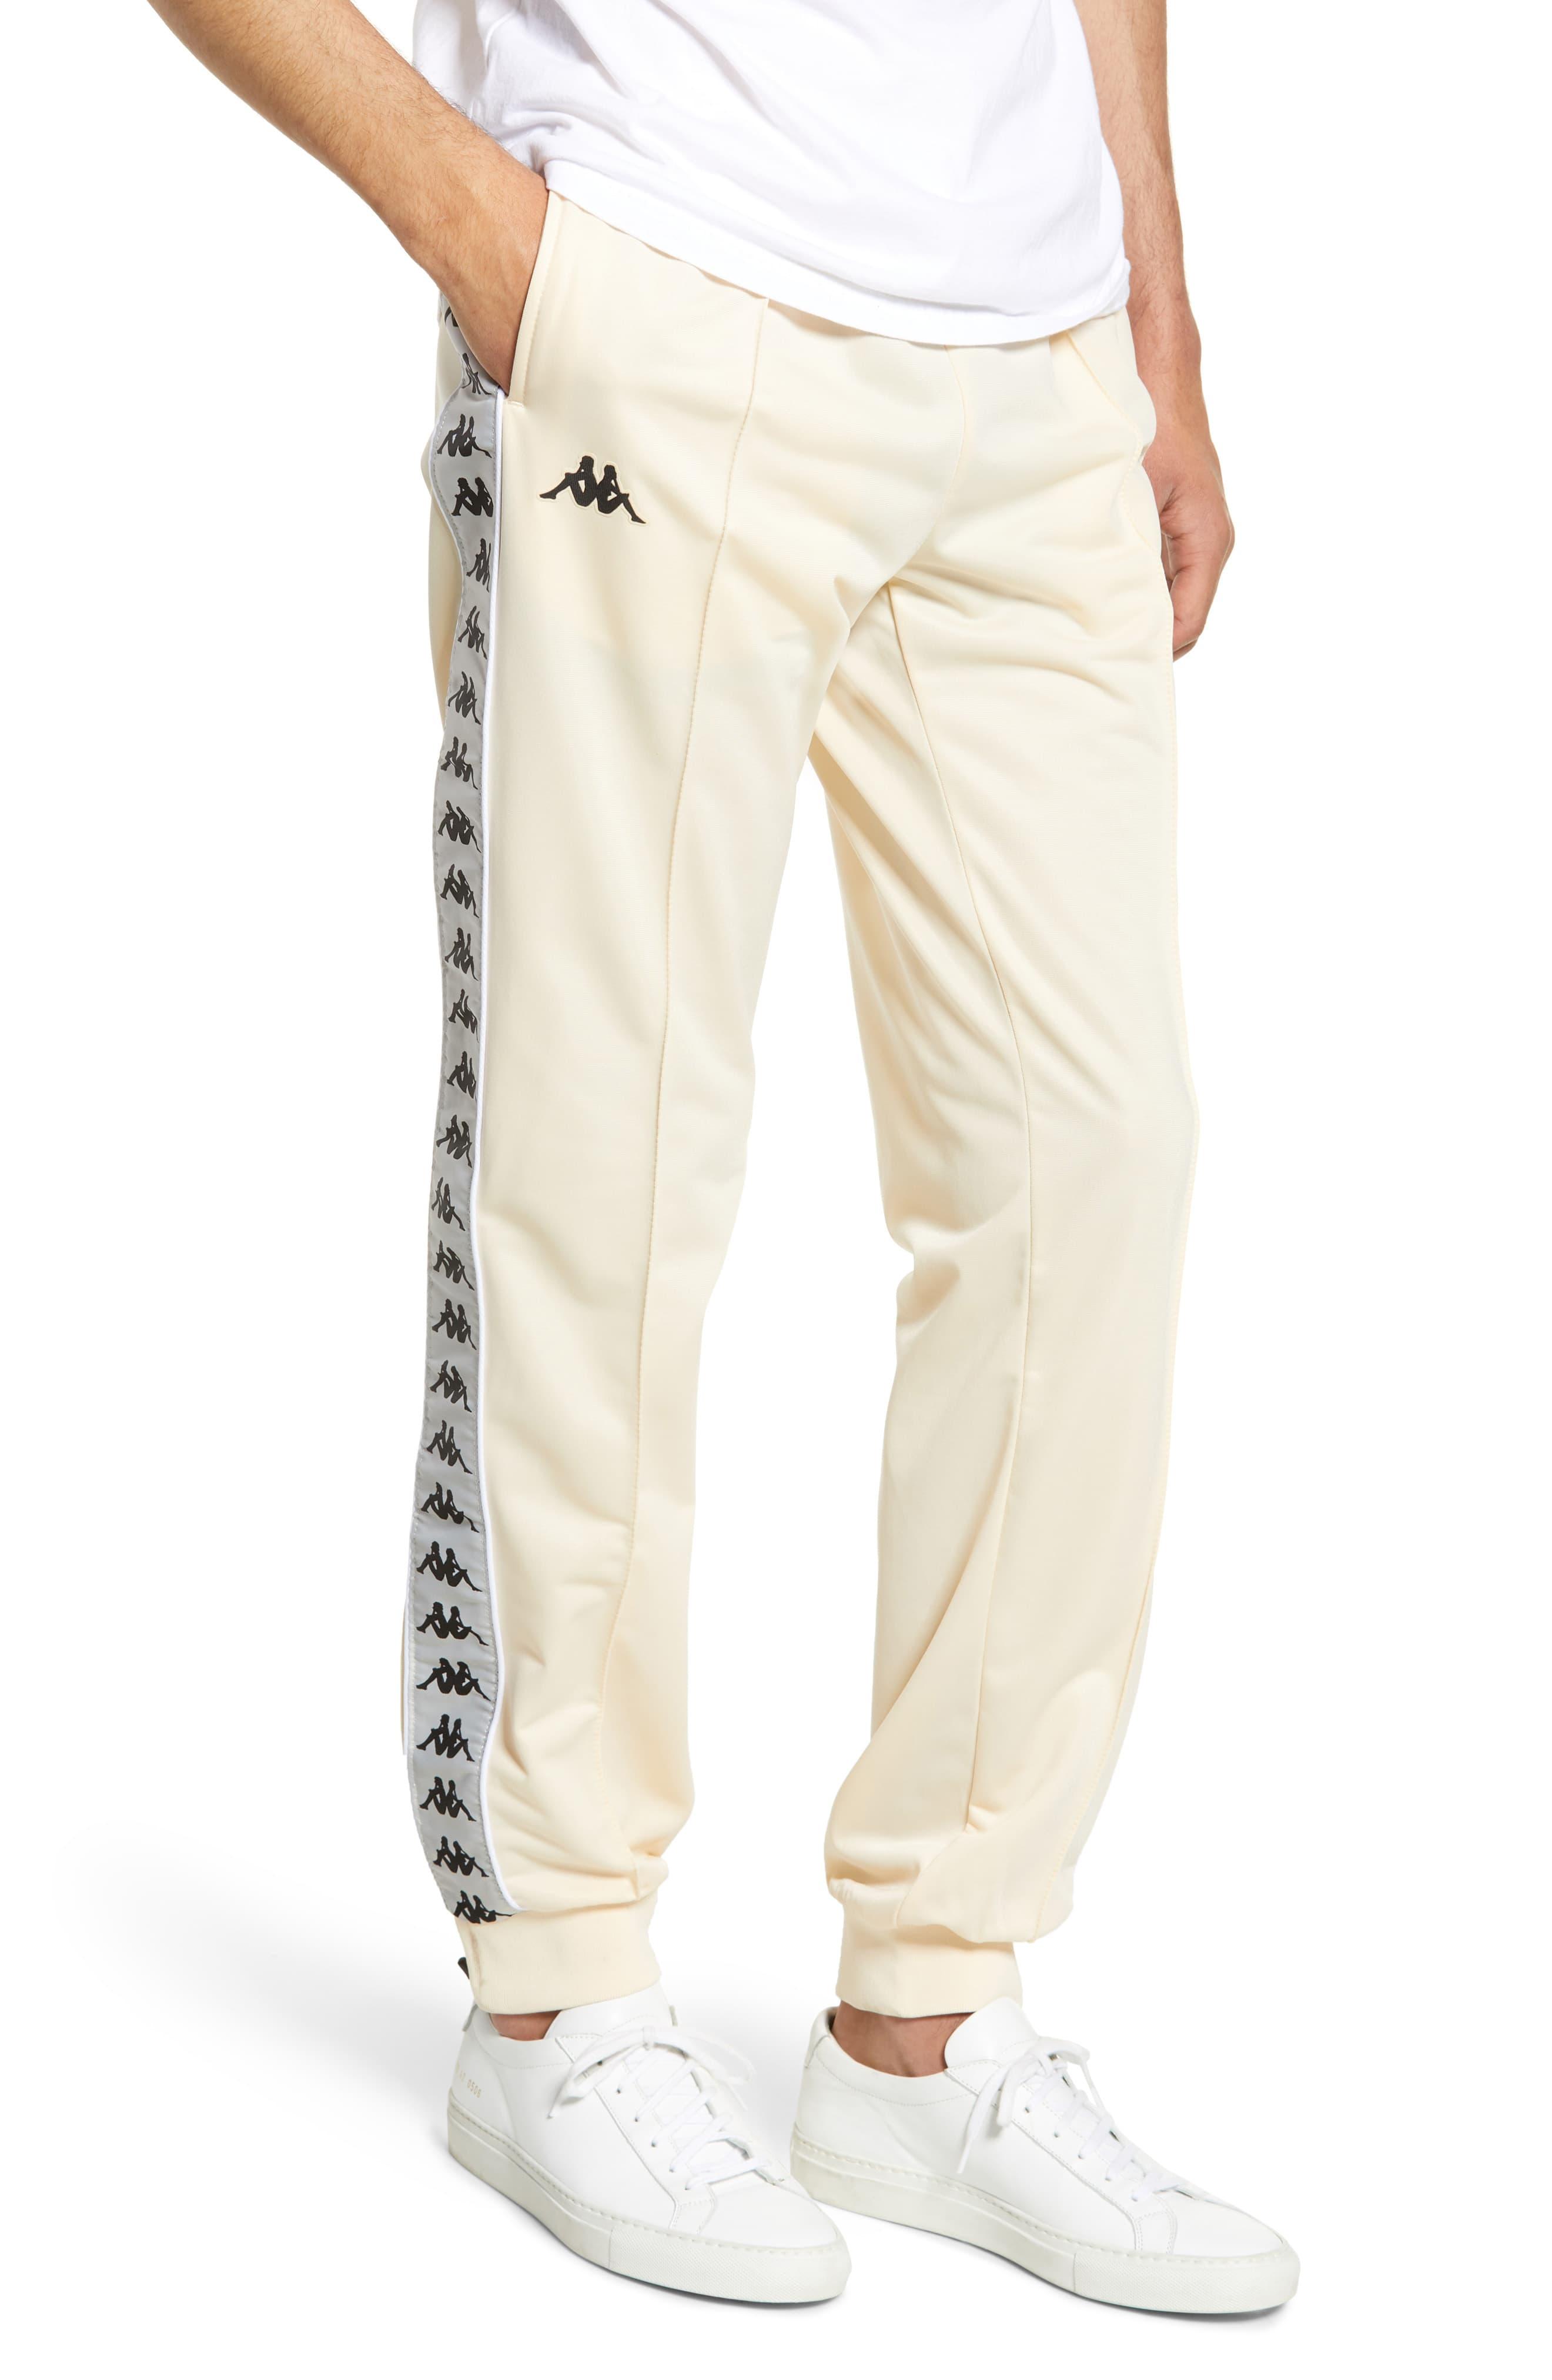 Kappa Synthetic Banda Astoria Track Pants in Beige/ Grey Silver/ Black  (Natural) for Men | Lyst